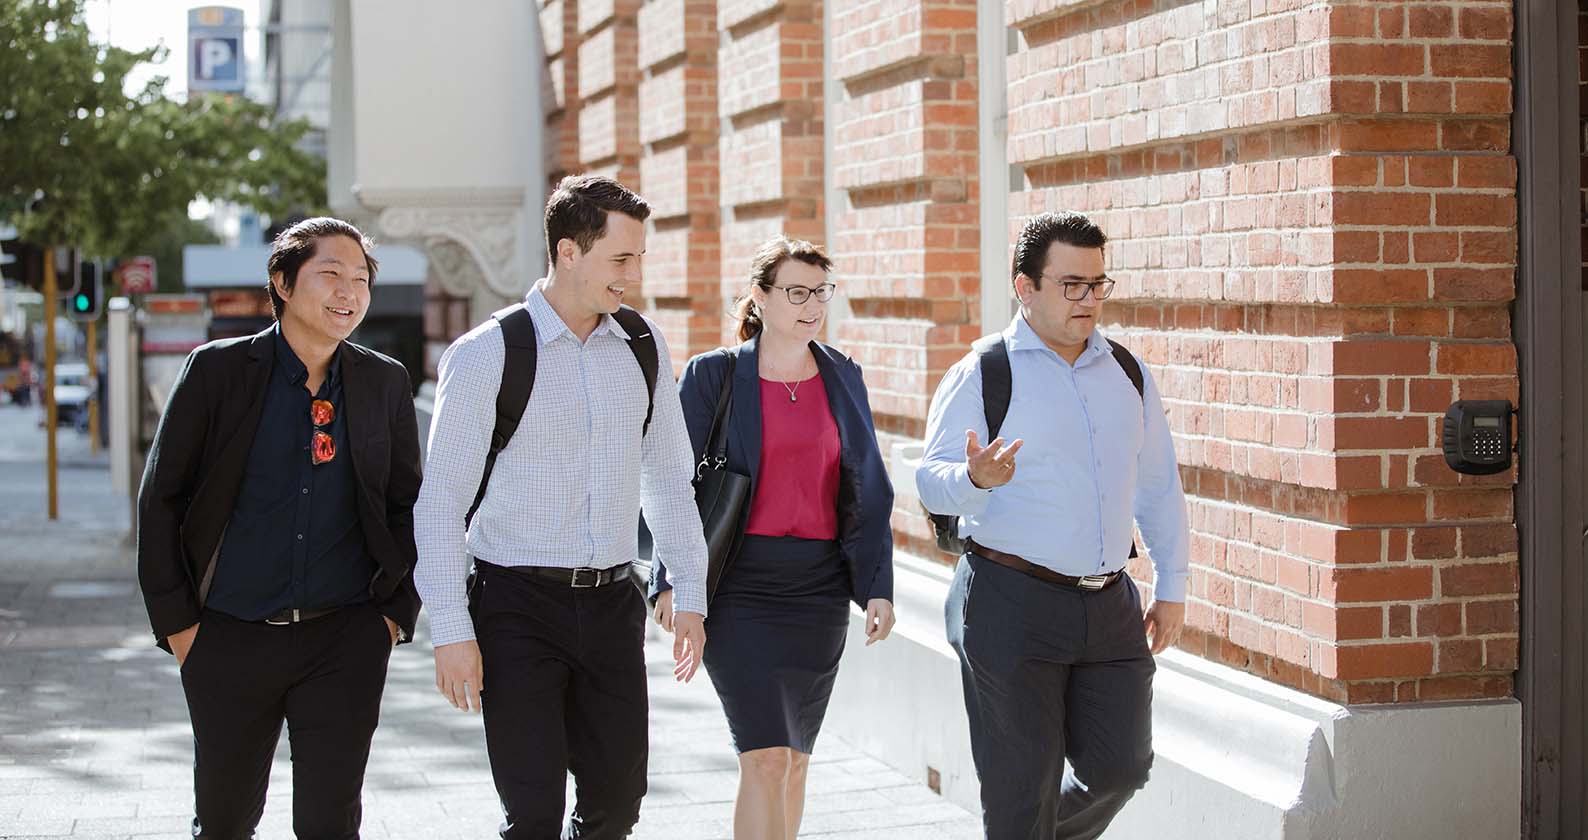 MBA students walking on St George's Terrace